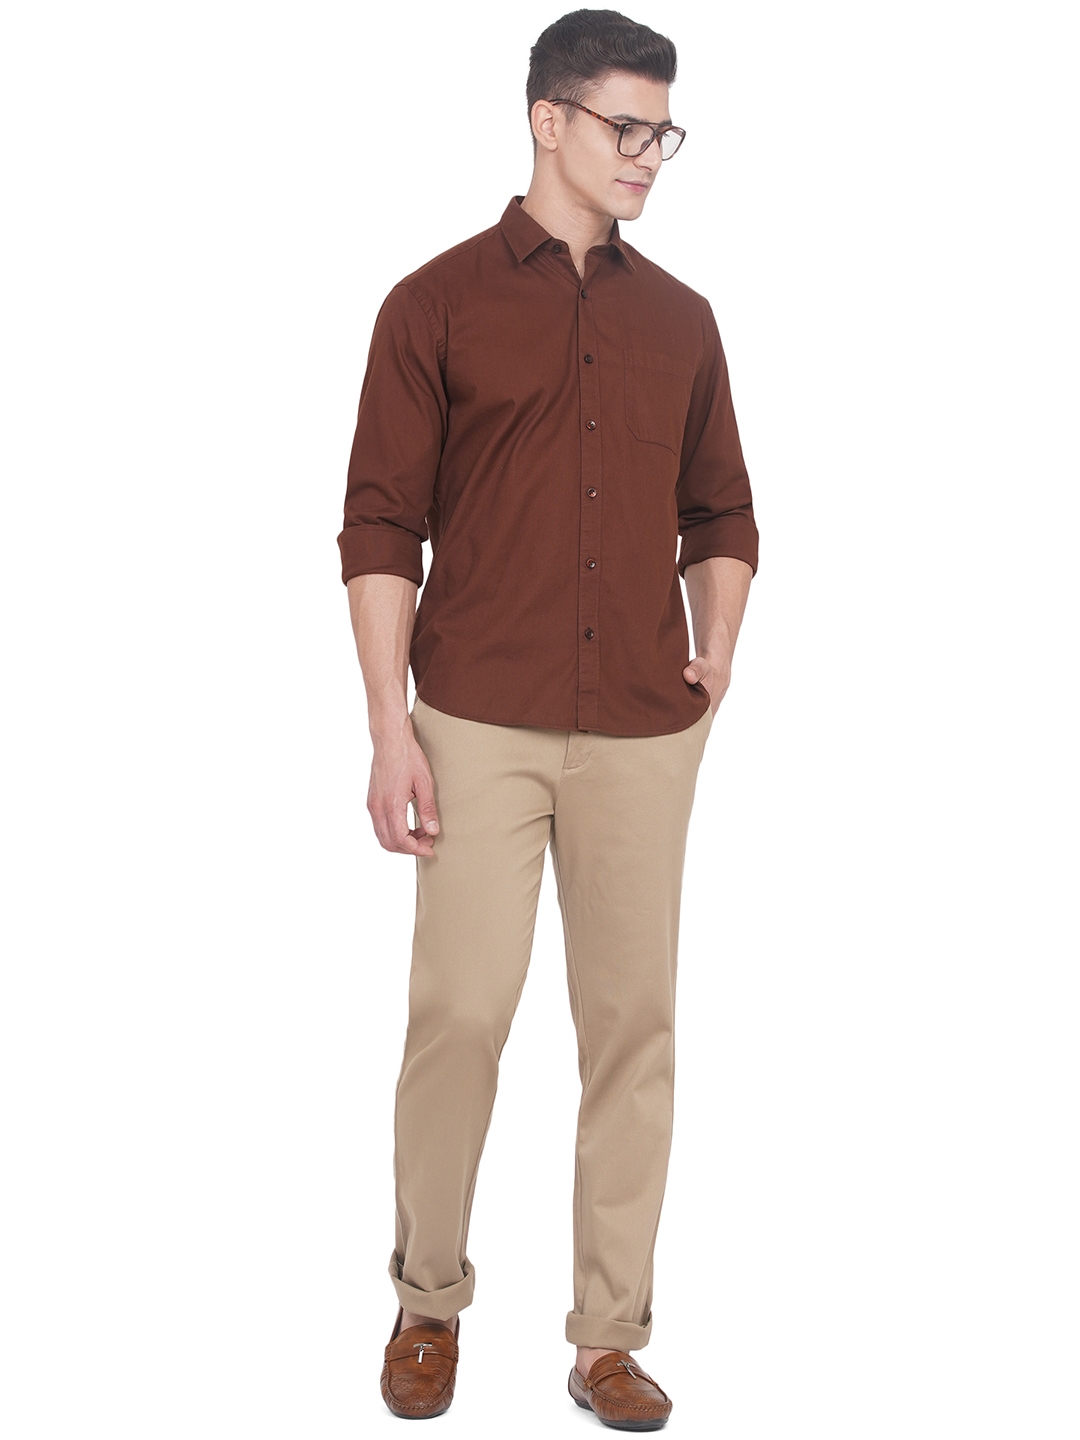 Greenfibre | Light Khaki Solid Slim Fit Casual Trouser | Greenfibre 3